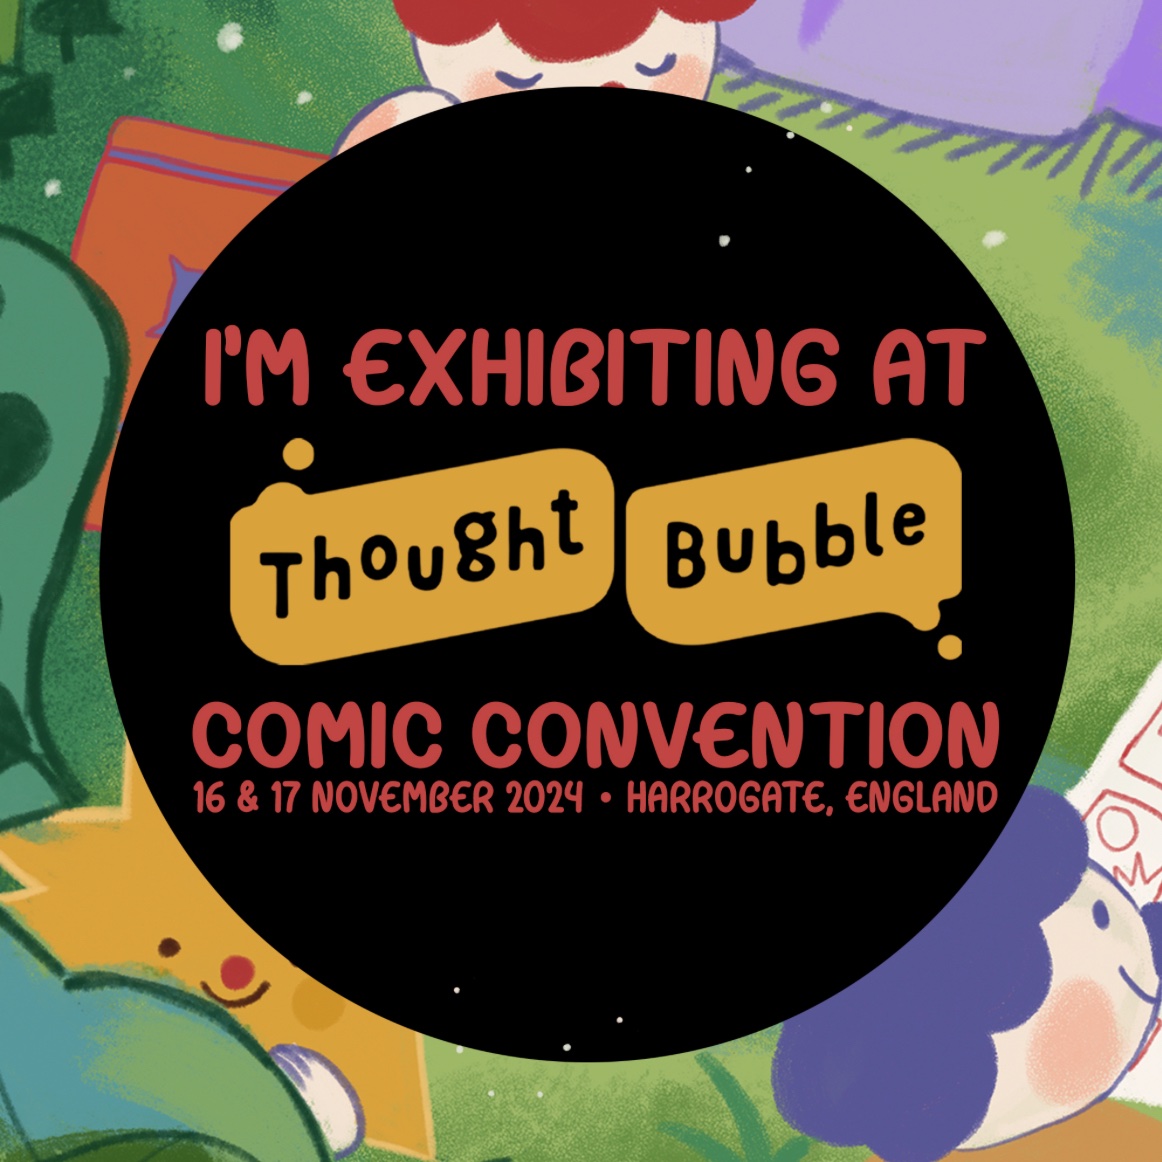 Absolutely thrilled to be back for my fav comics weekend of the year @ThoughtBubbleUK ✨

Look forward to hanging with everyone & our annual comics get together!
#TBF24